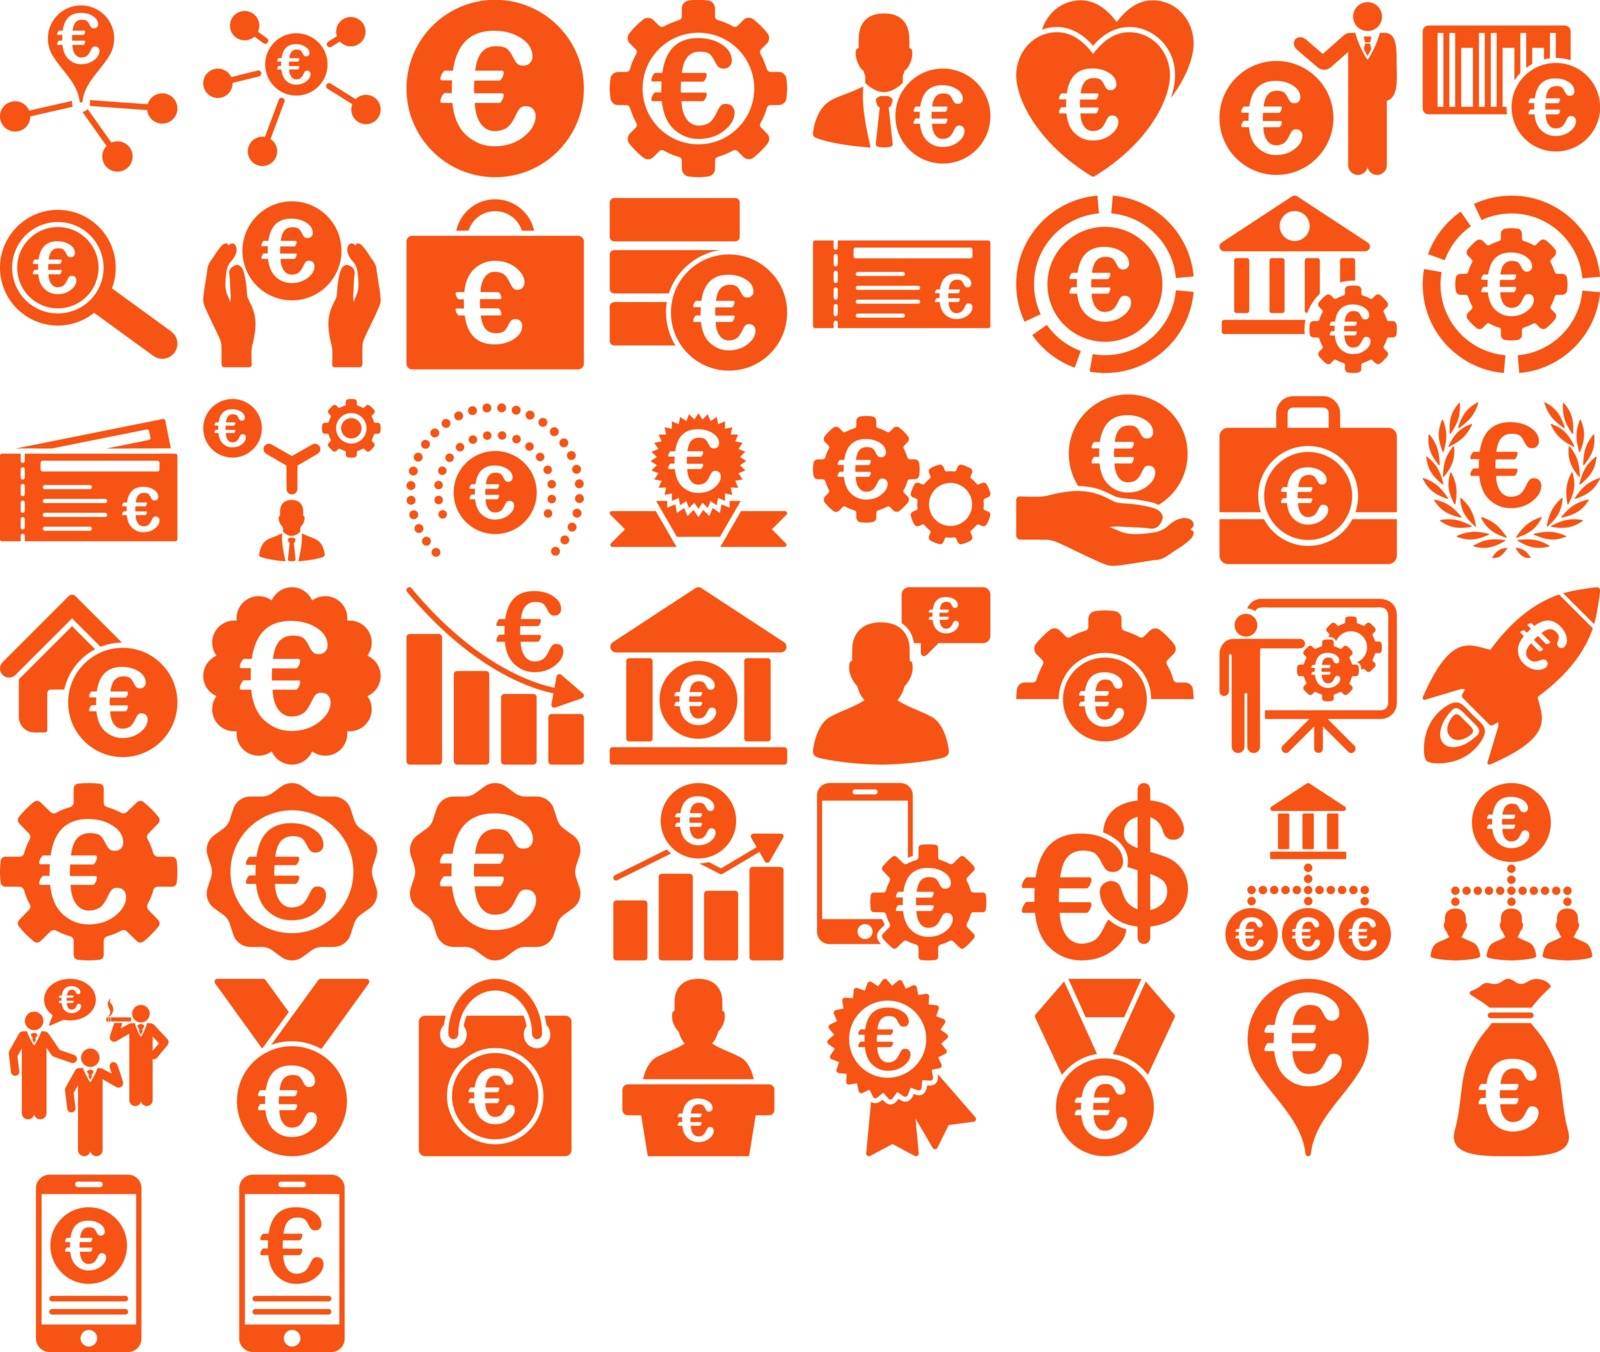 Euro Business Iconst. These flat icons use orange color. Vector images are isolated on a white background. 